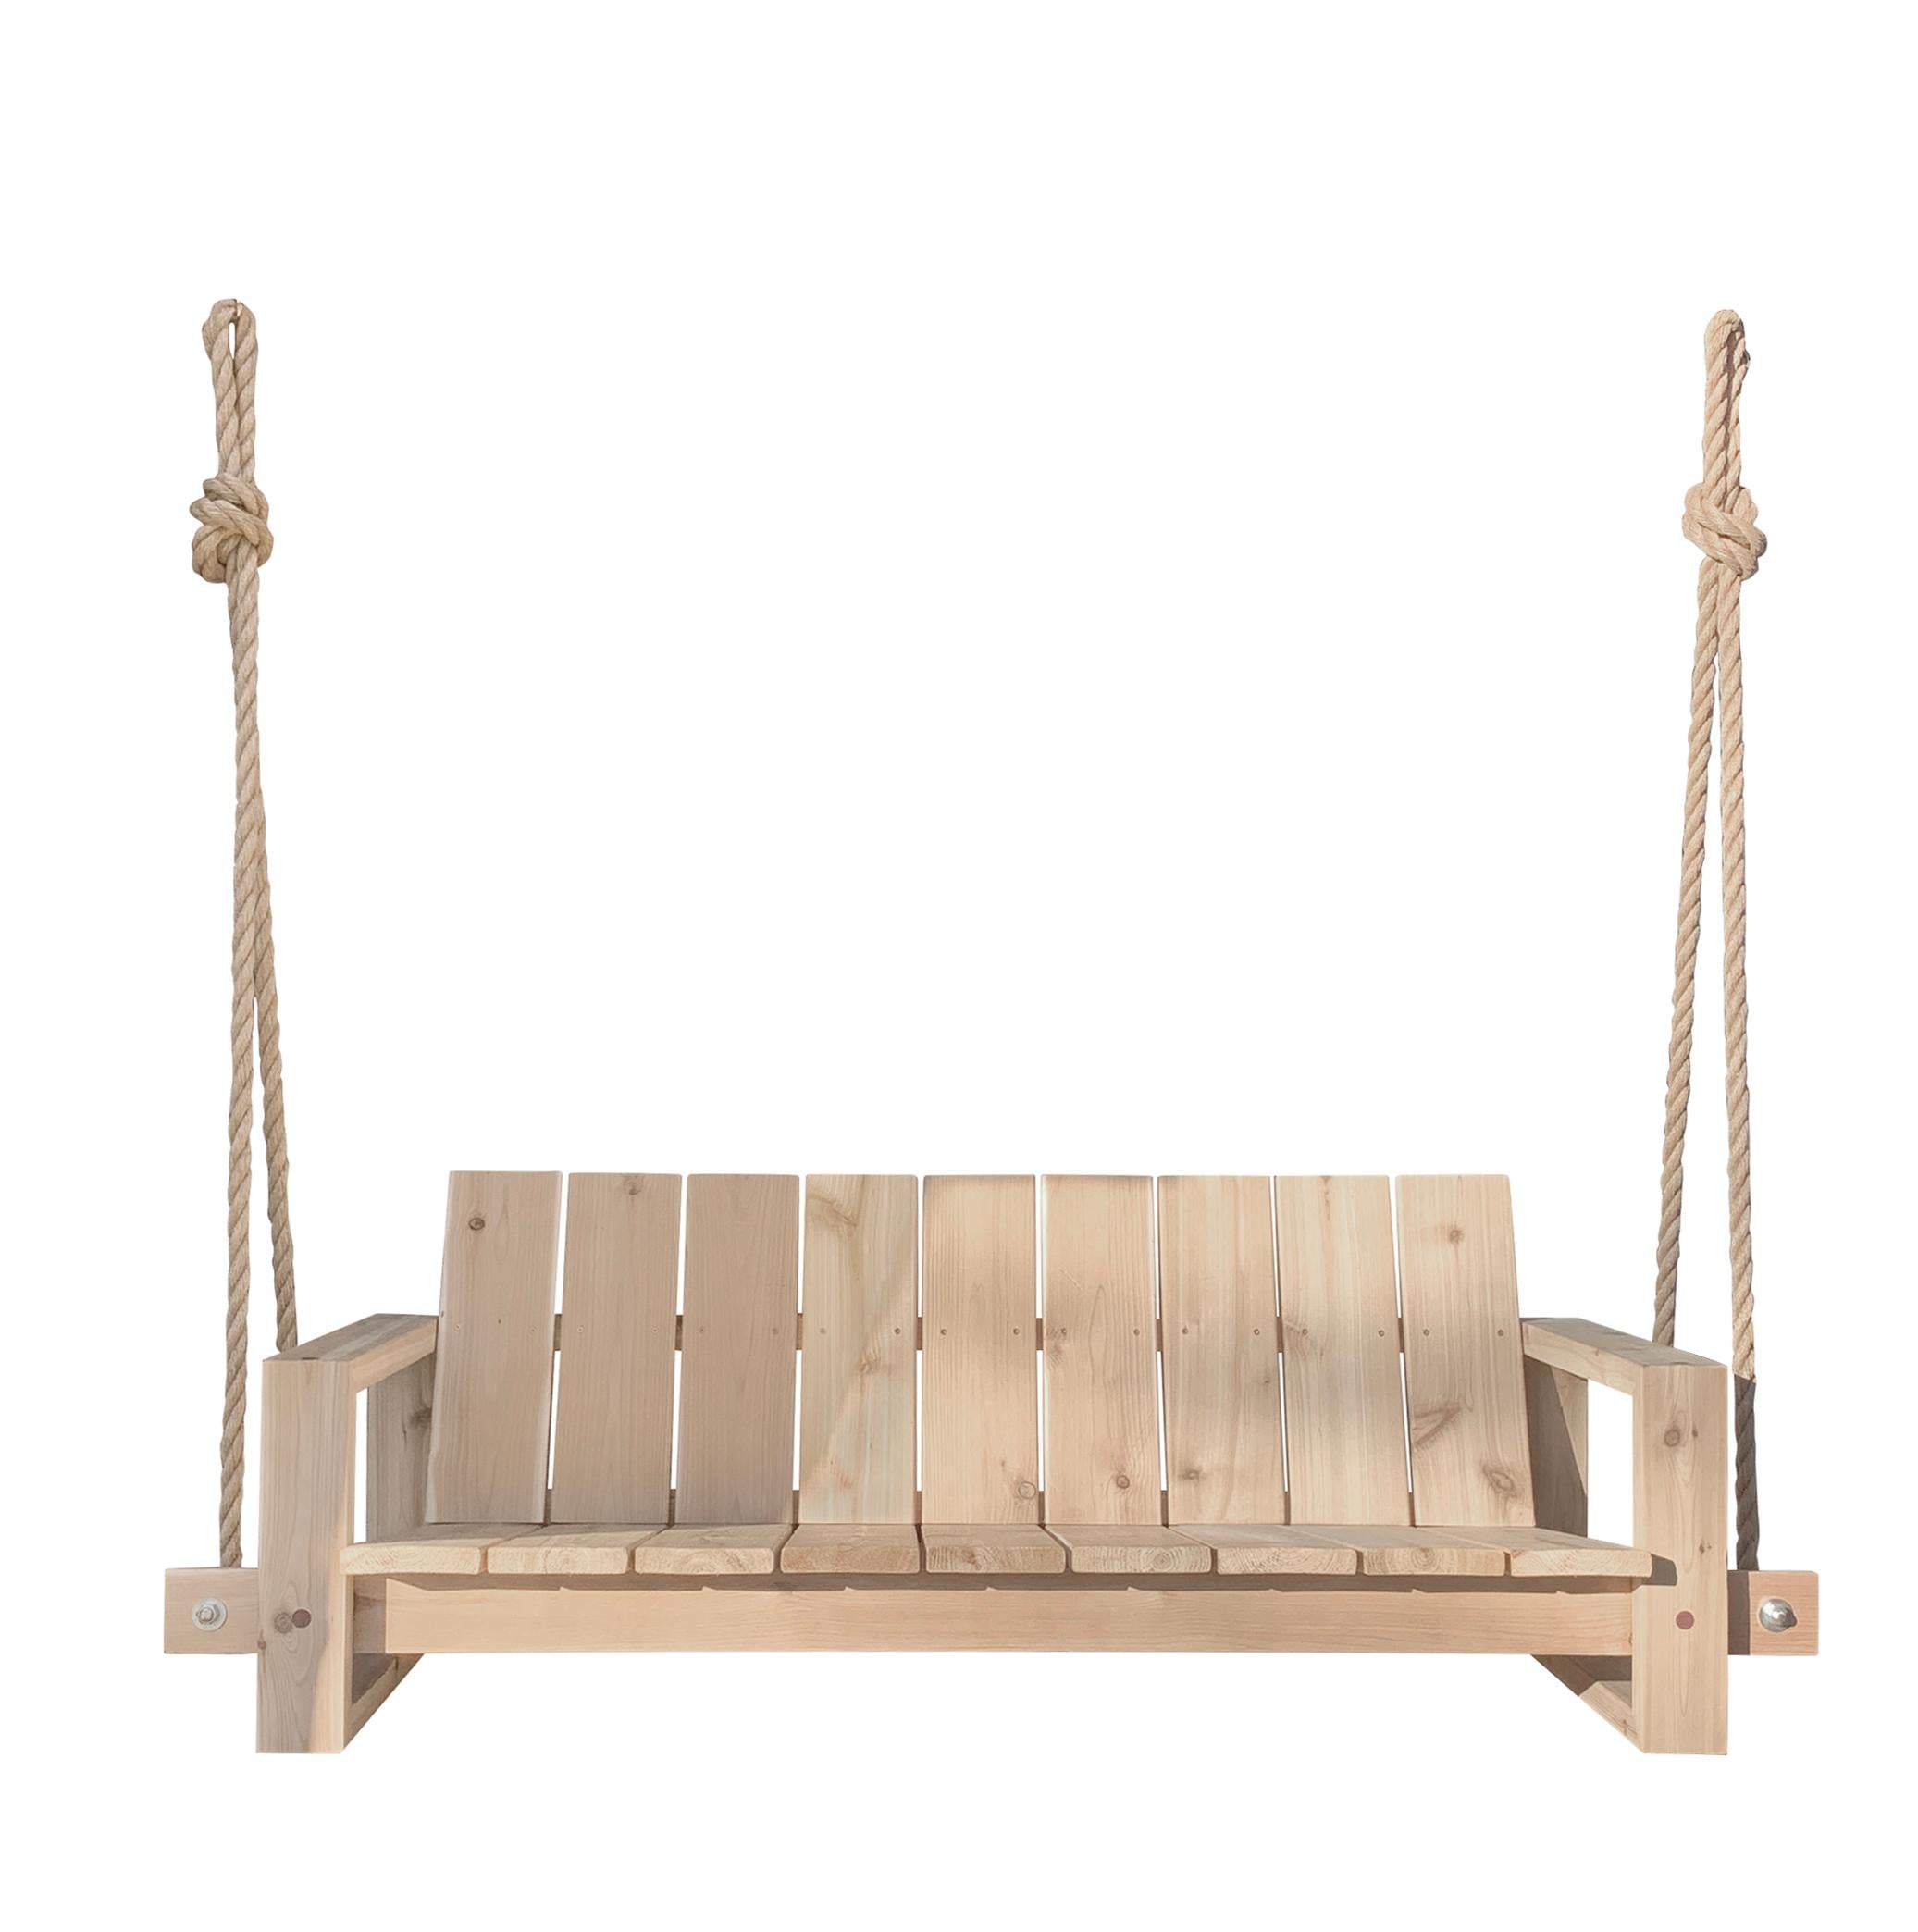 Hand made solid cedar porch swing. Unique design inspired by clean lines of organic Scandinavian Modernism.